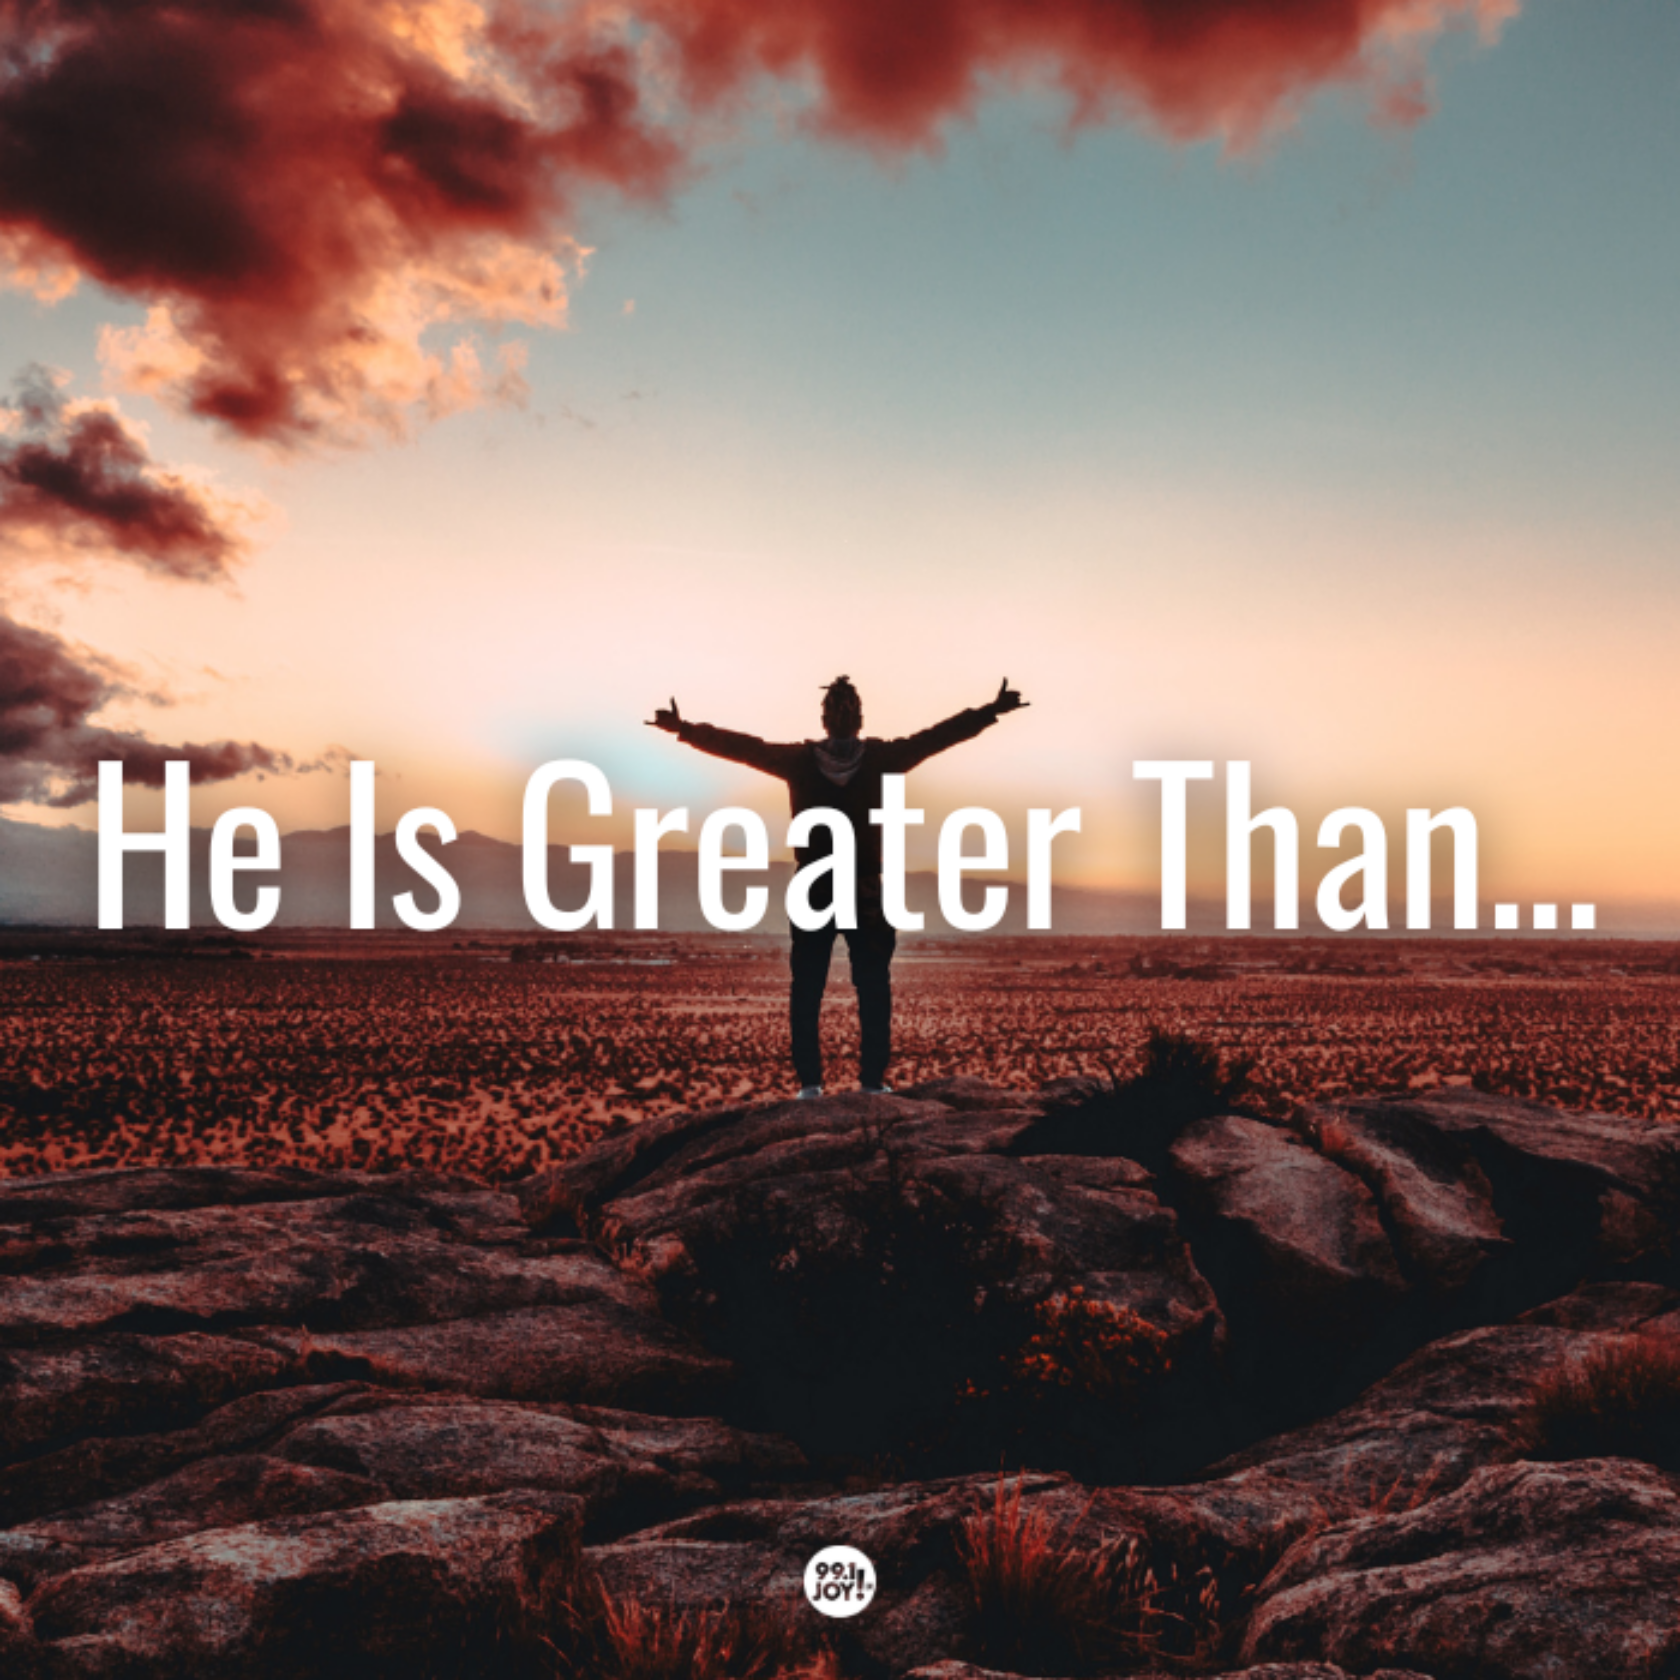 He Is Greater Than…